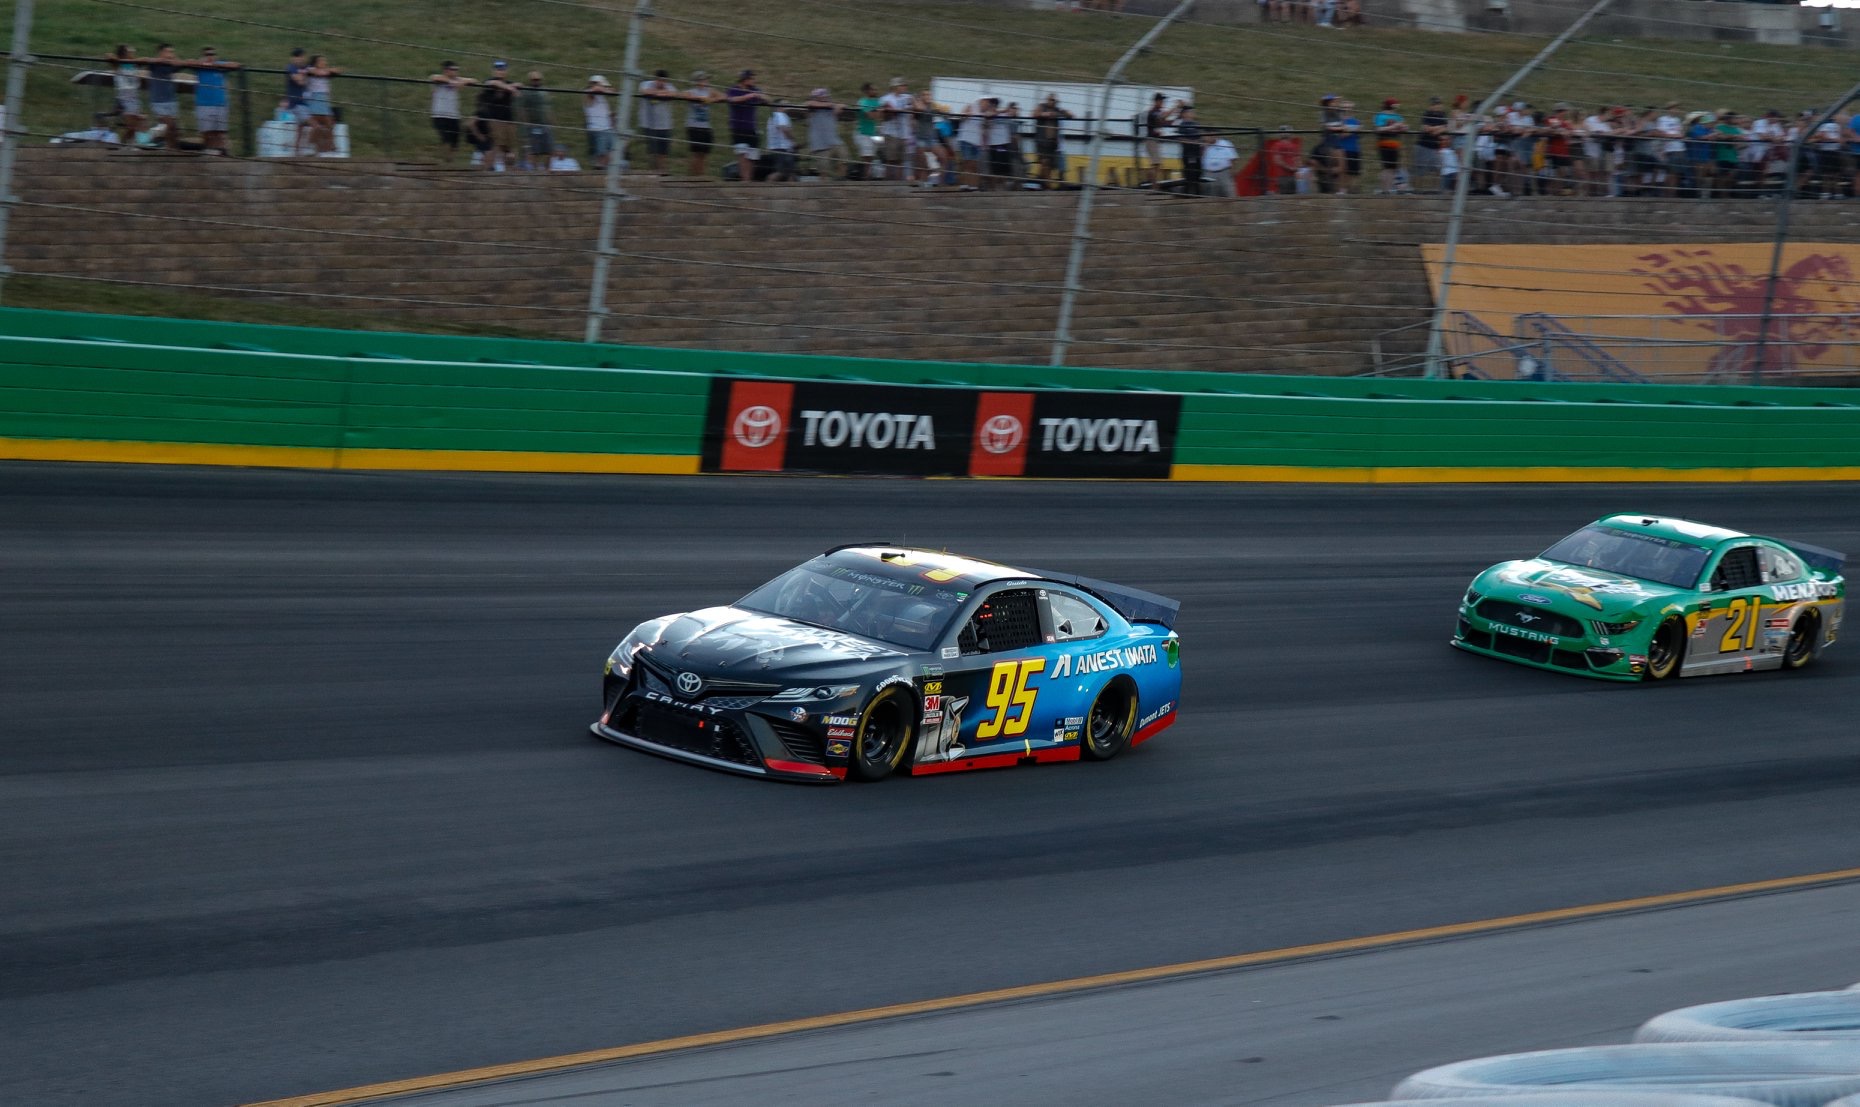 More often than not, DiBenedetto's put that No. 95 Toyota towards the top-15. (Photo Credit: Stephen Conley/TPF)